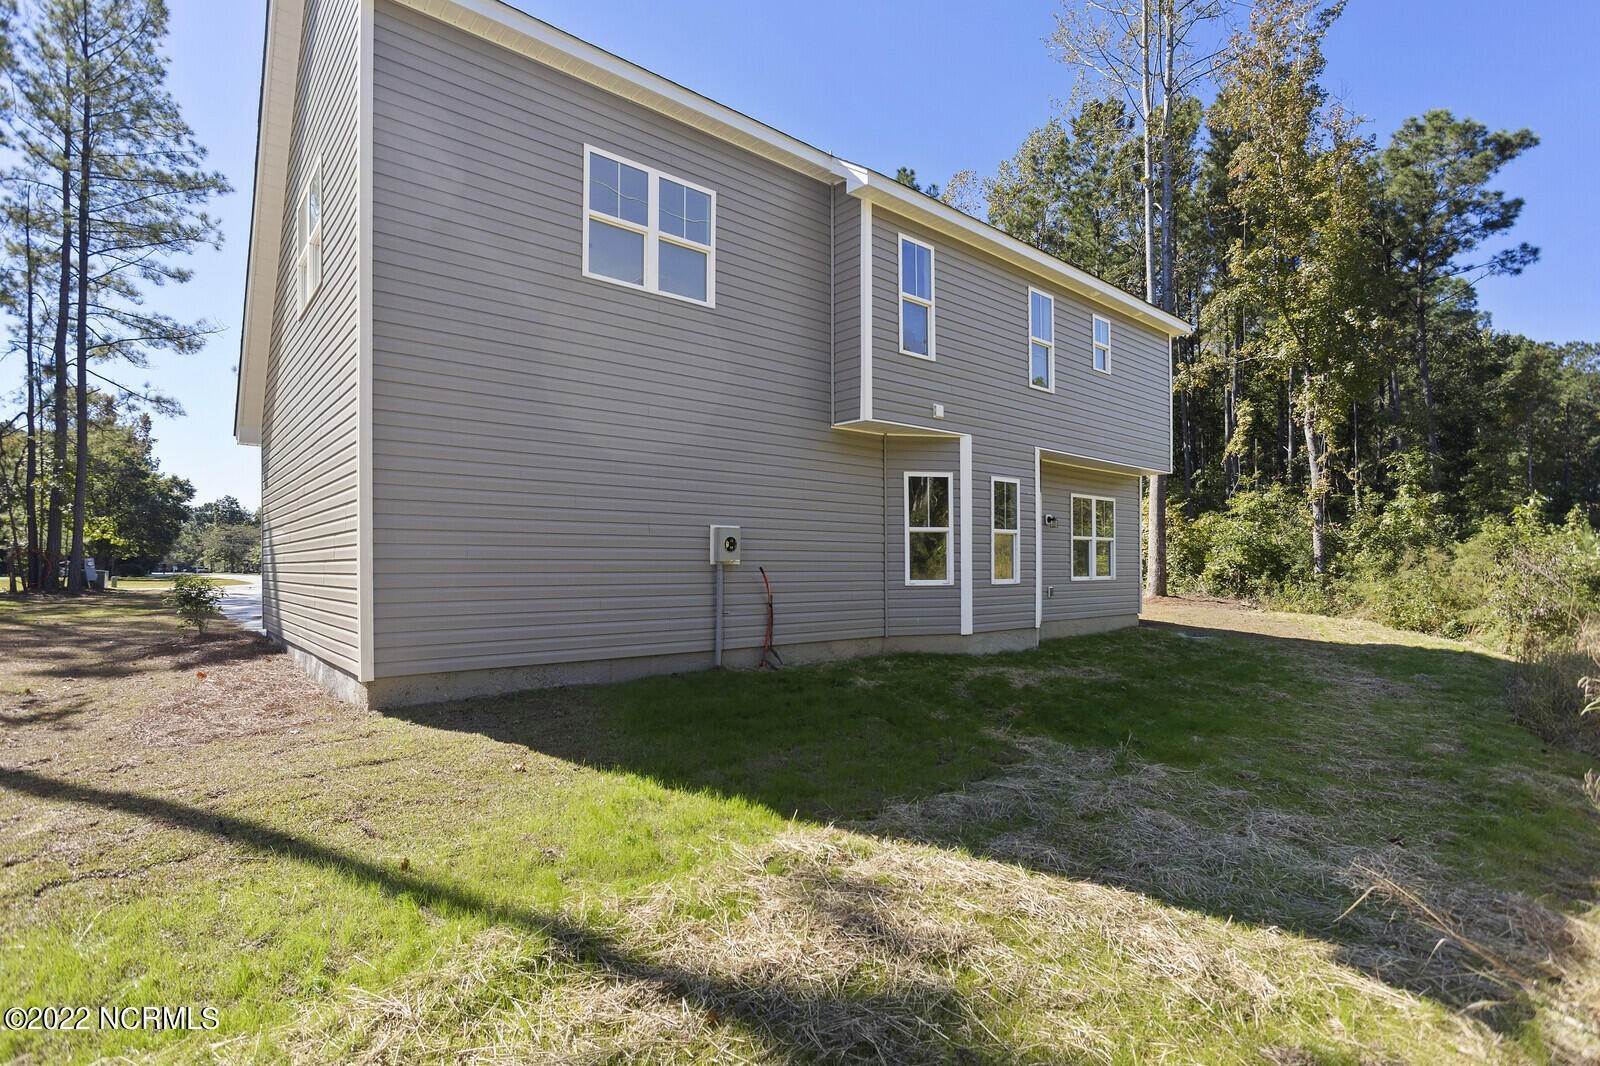 8. Single Family for Sale at Rocky Point, NC 28457